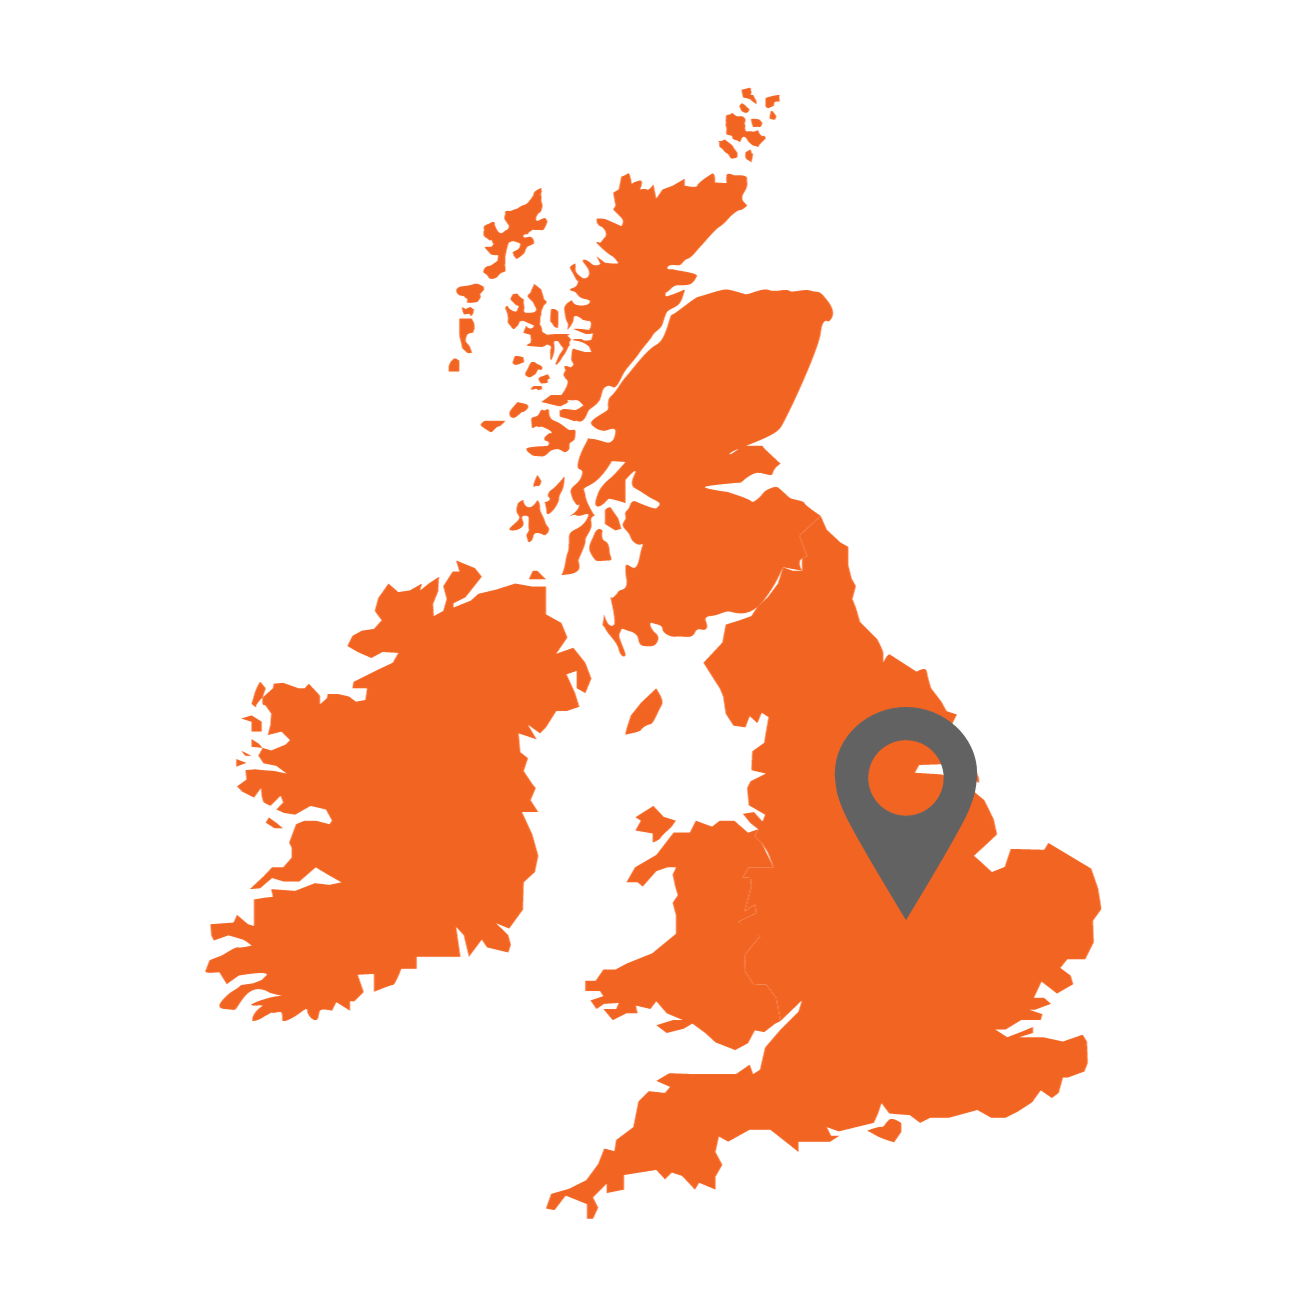 Orange map of the British Isles, with the East Midlands pointed out by a grey location pin